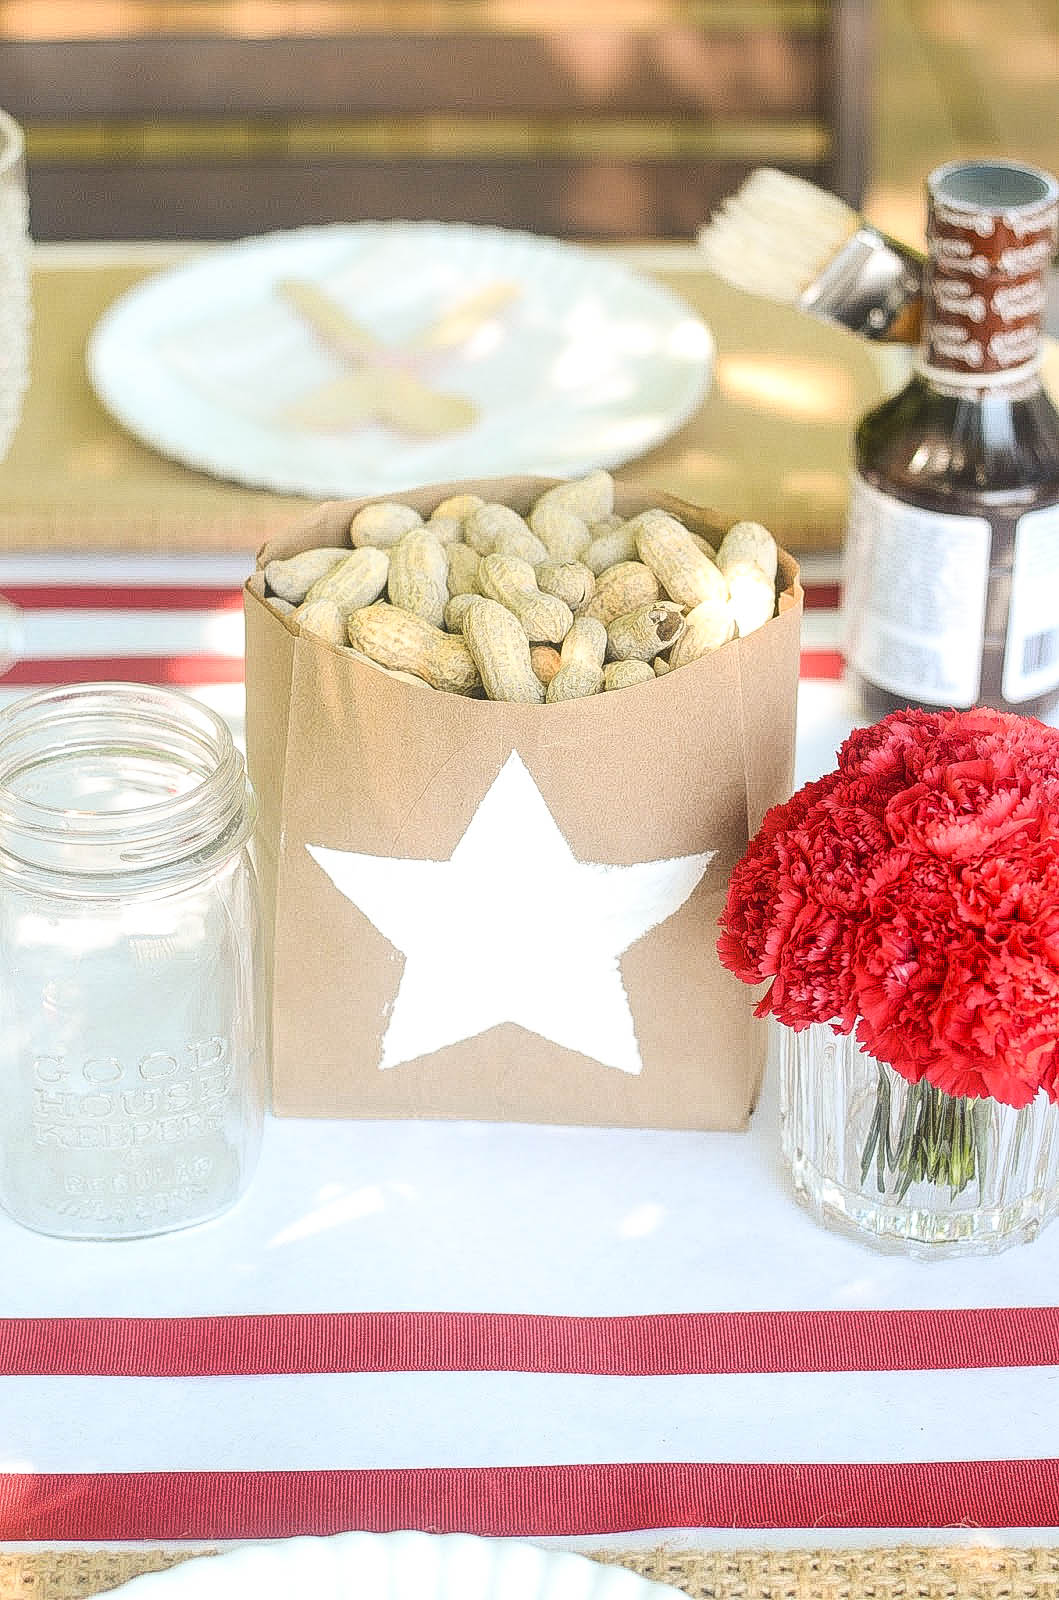  Brown paper lunch bags and white plaint is all that is needed to make these fun practical centerpieces! 